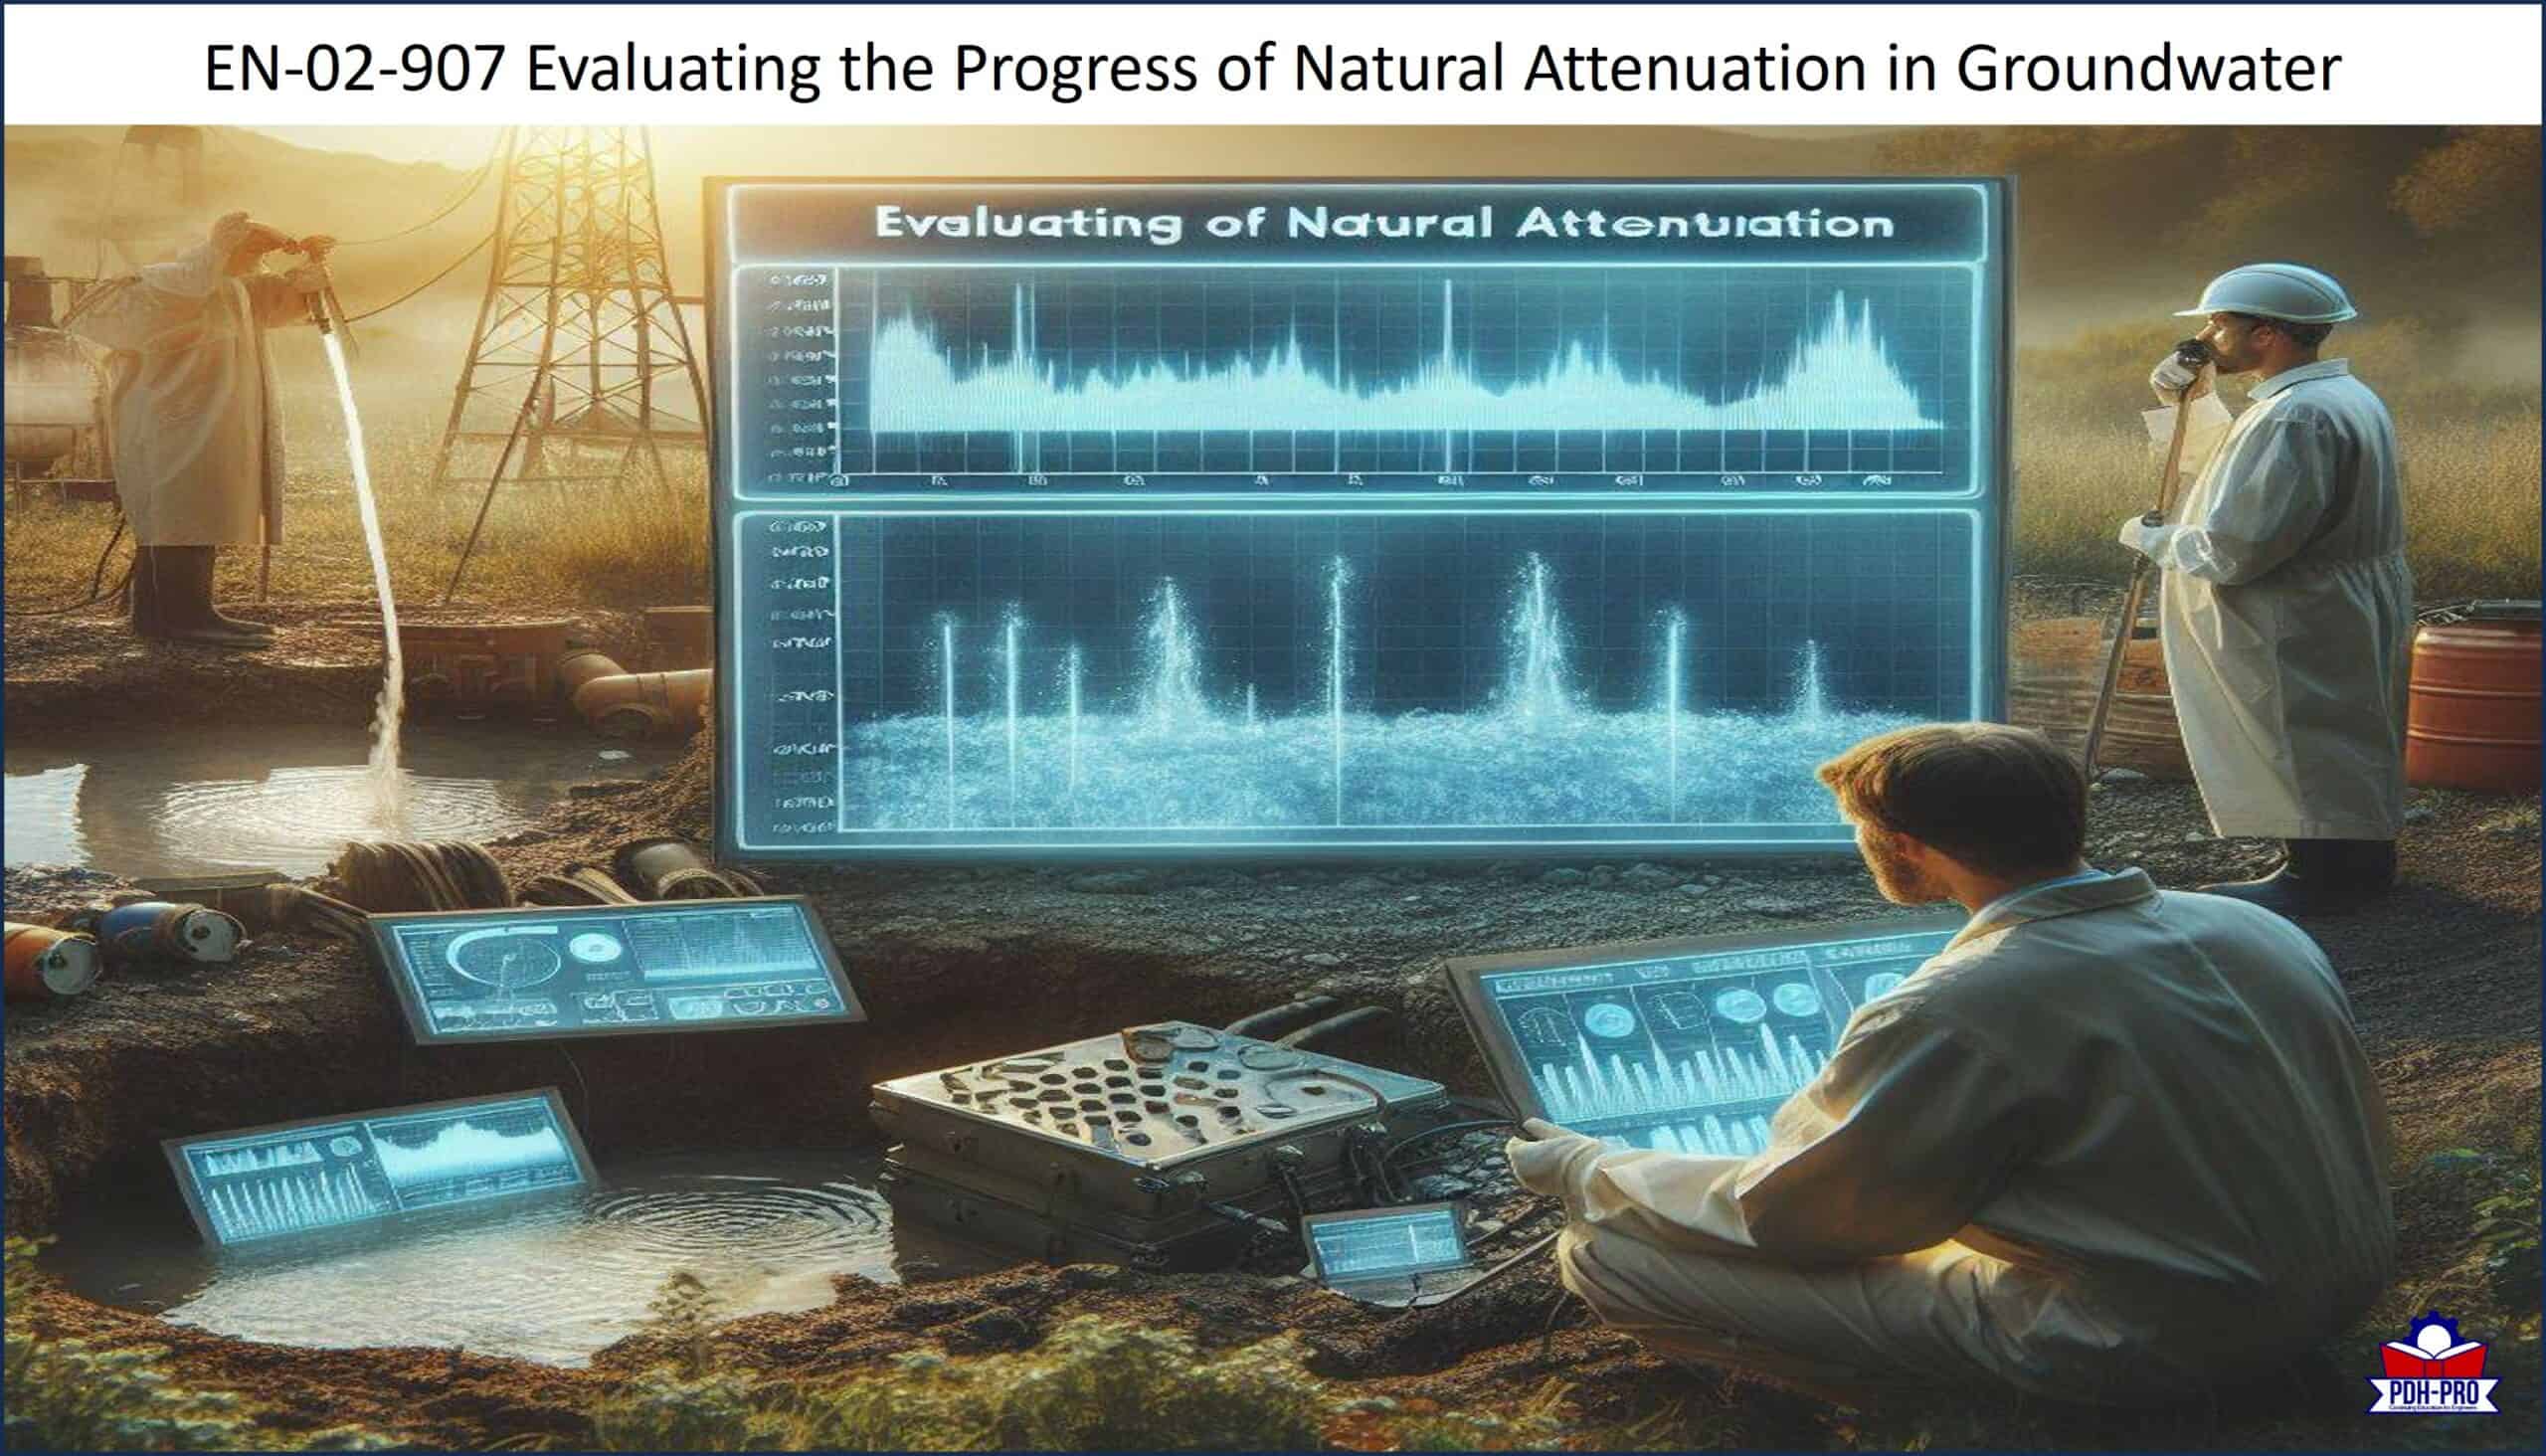 Evaluating the Progress of Natural Attenuation in Groundwater